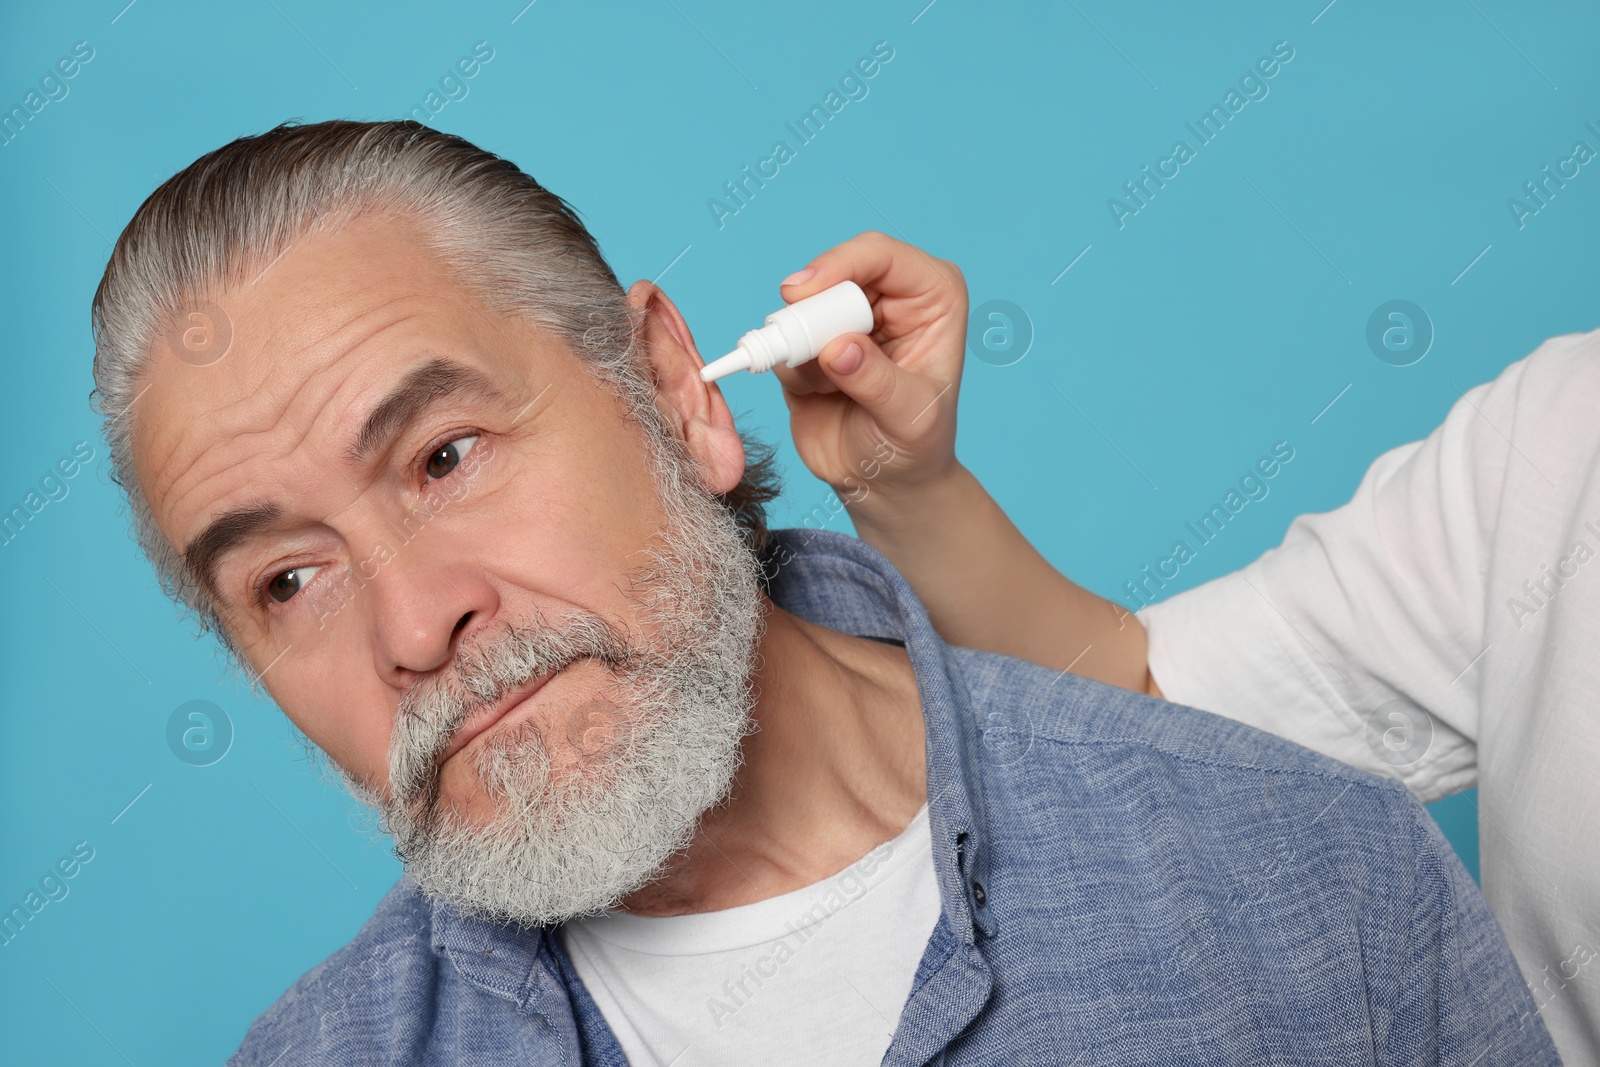 Photo of Young woman dripping medication into man's ear on light blue background